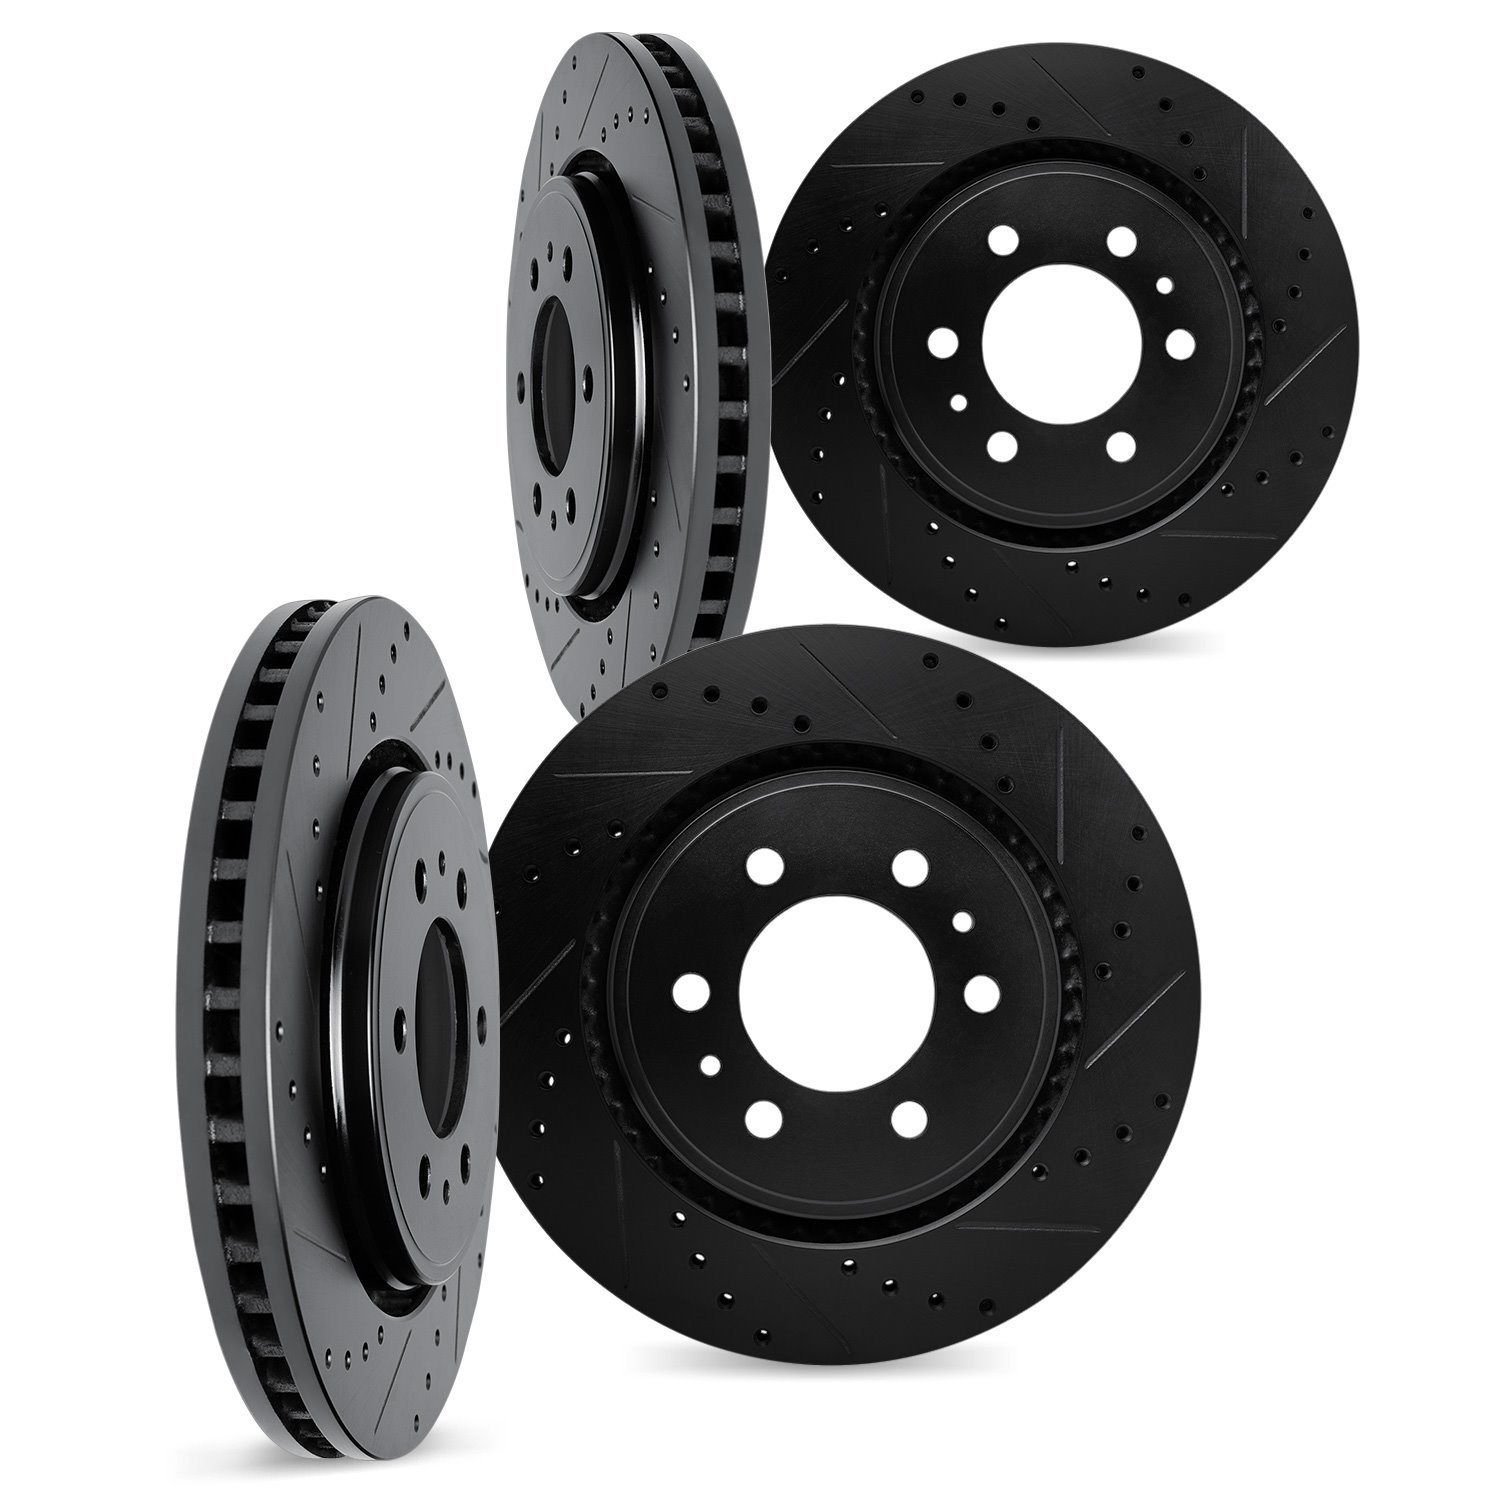 8004-47105 Drilled/Slotted Brake Rotors [Black], Fits Select GM, Position: Front and Rear